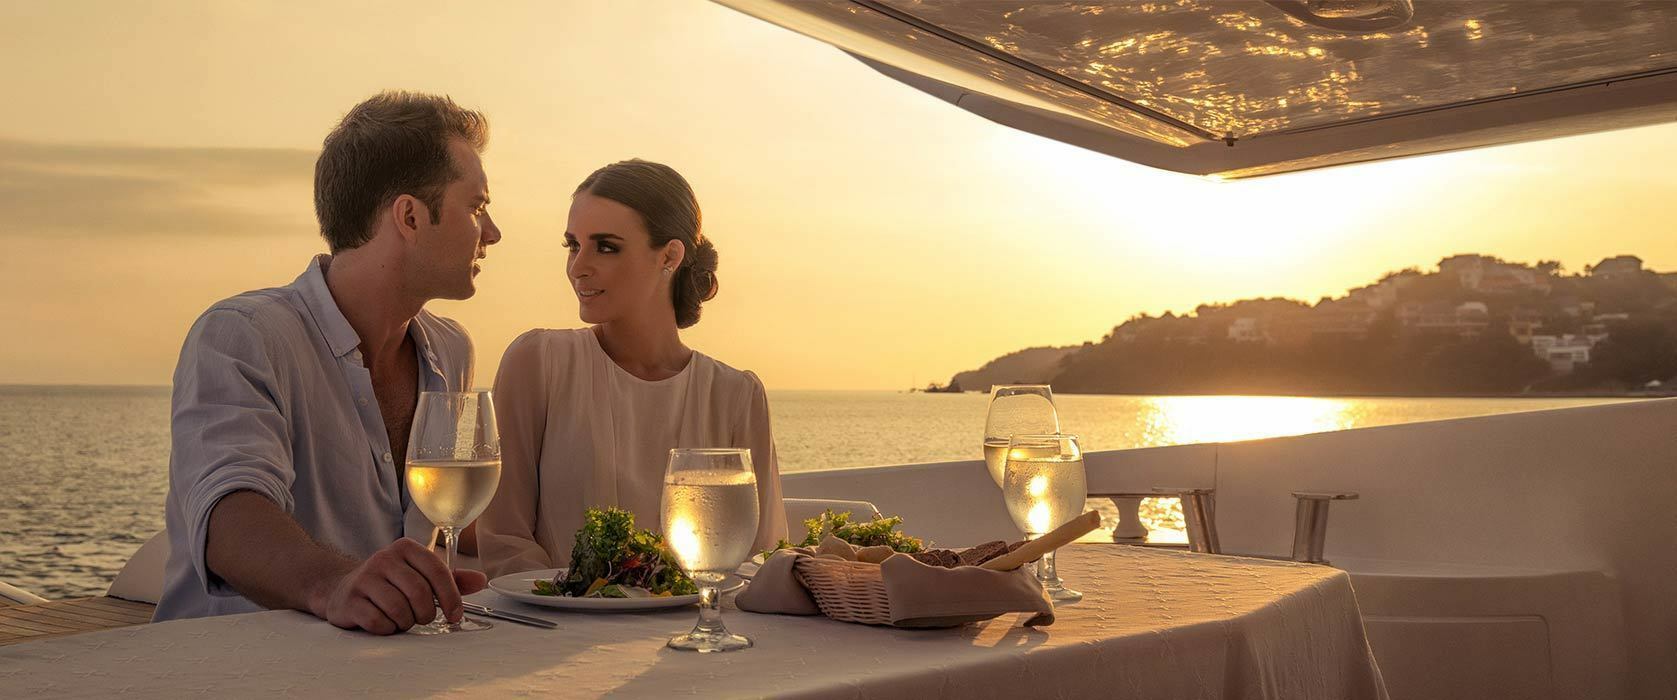 Romantic dinner on a boat: sailing yacht rental